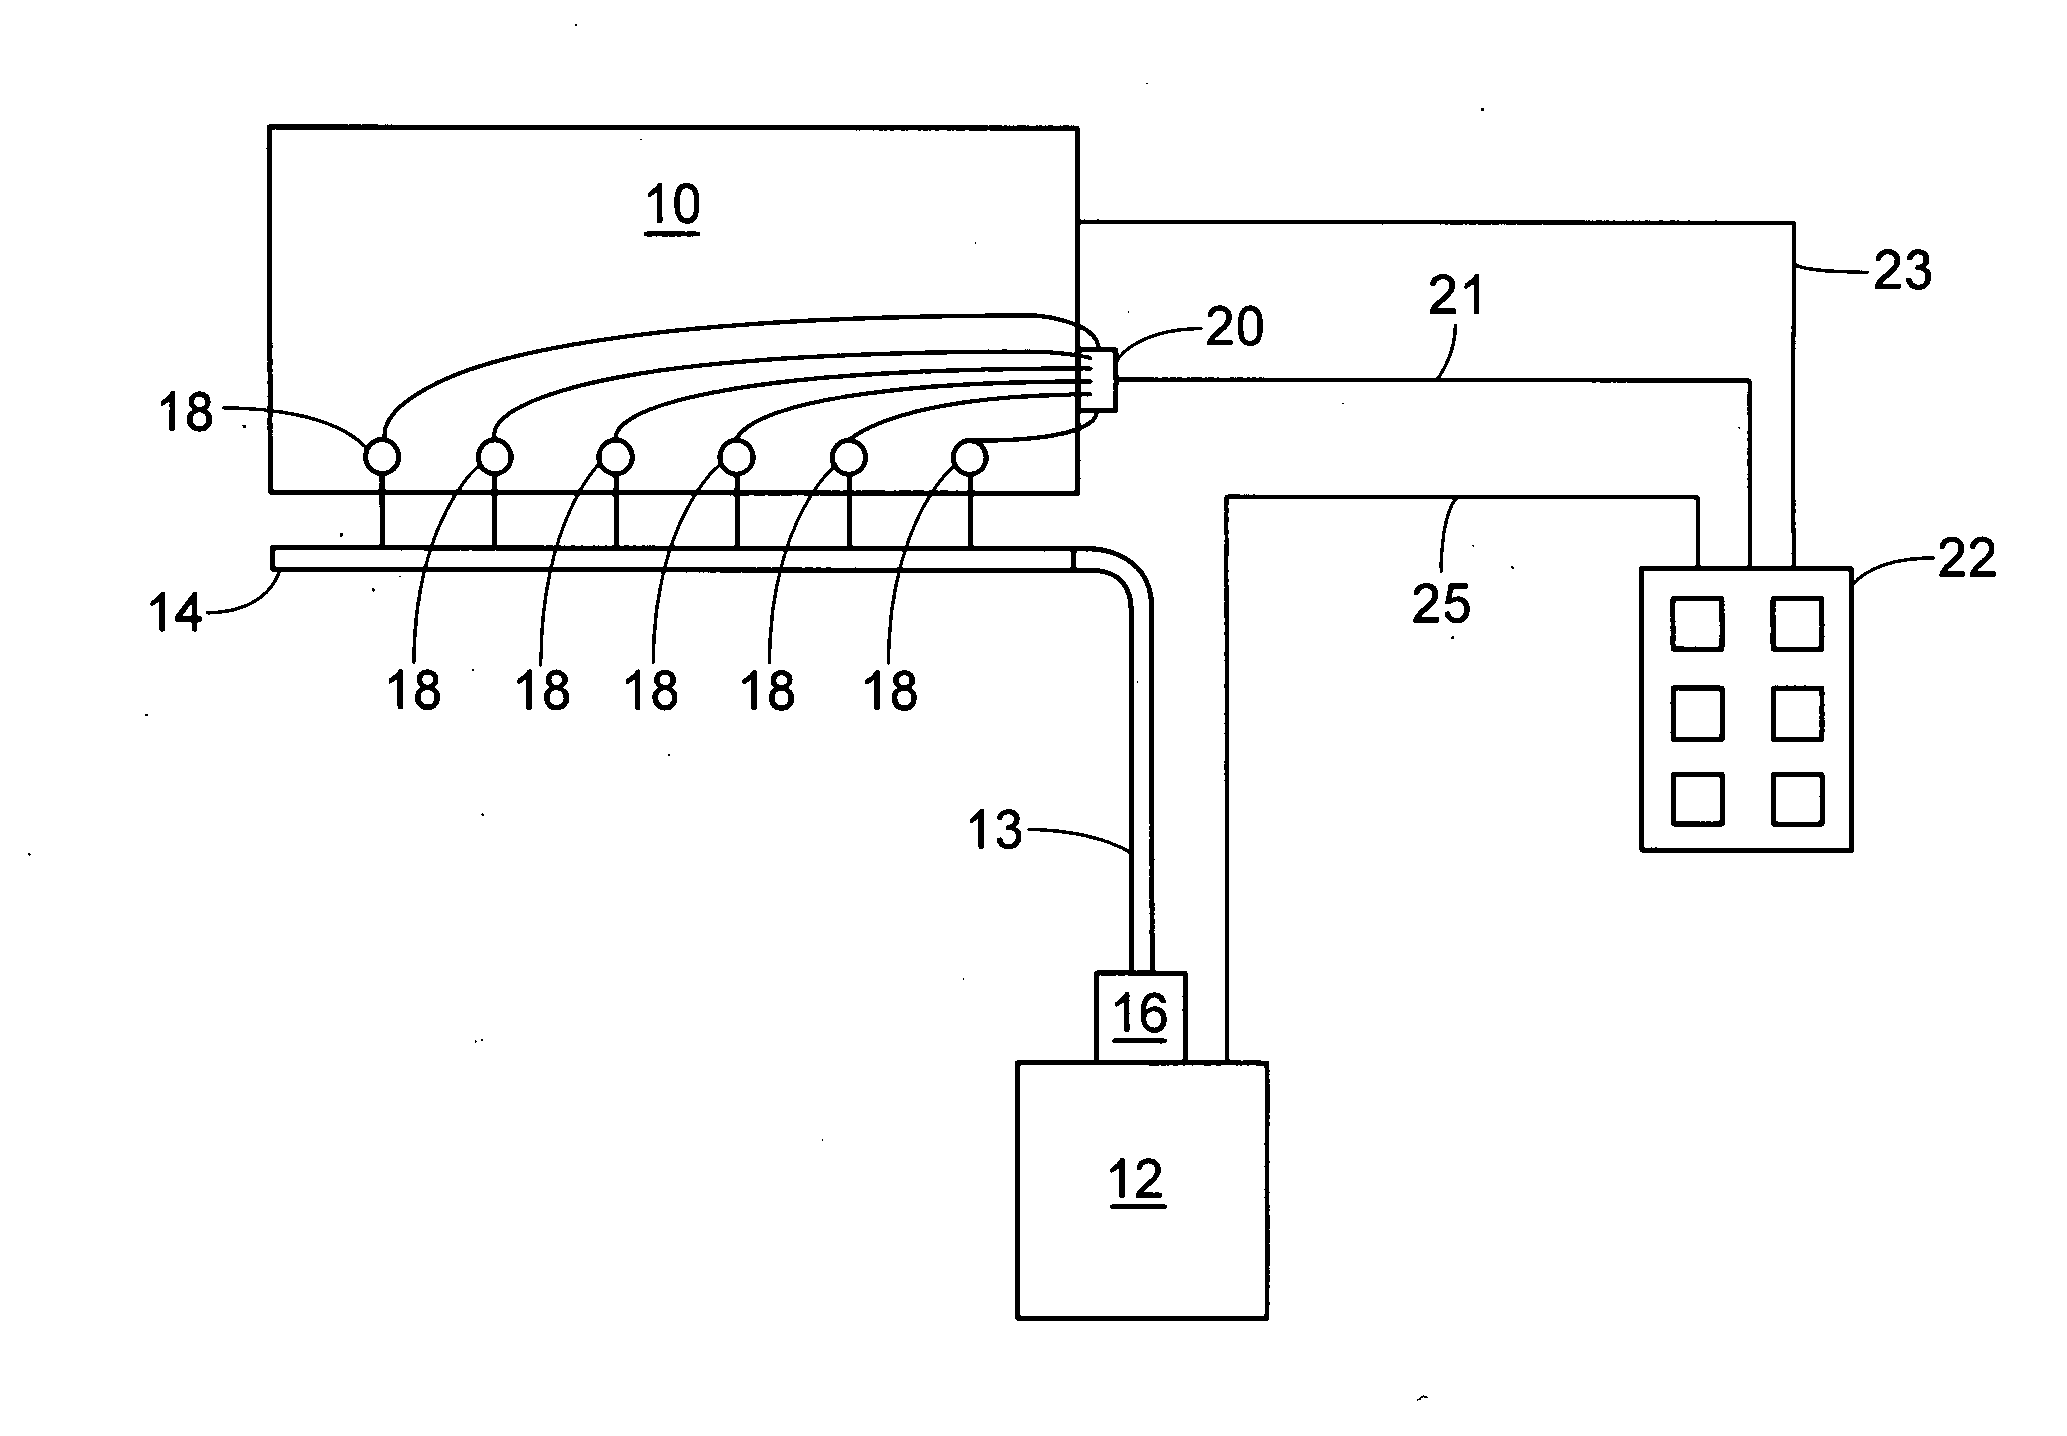 Sequential injection lubrication system for internal combustion engine operating on natural gas or alternative fuels